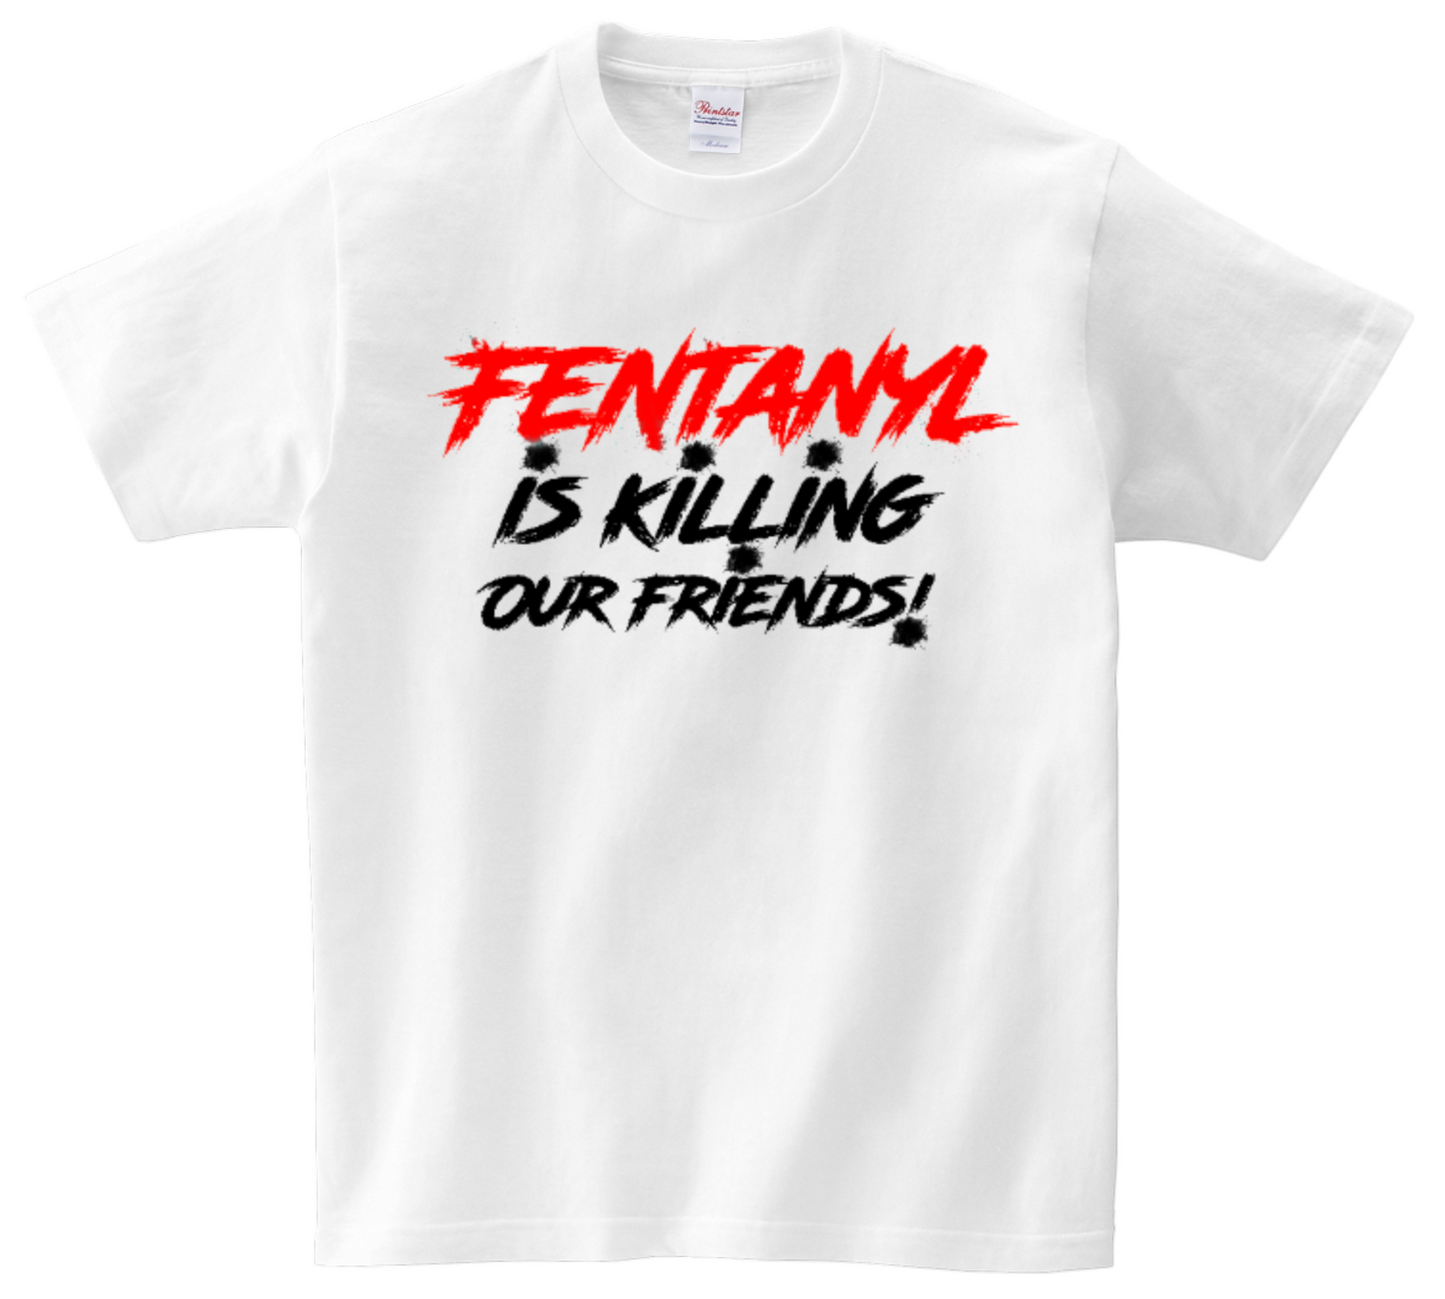 Fentanyl Awareness "Killing our friends"